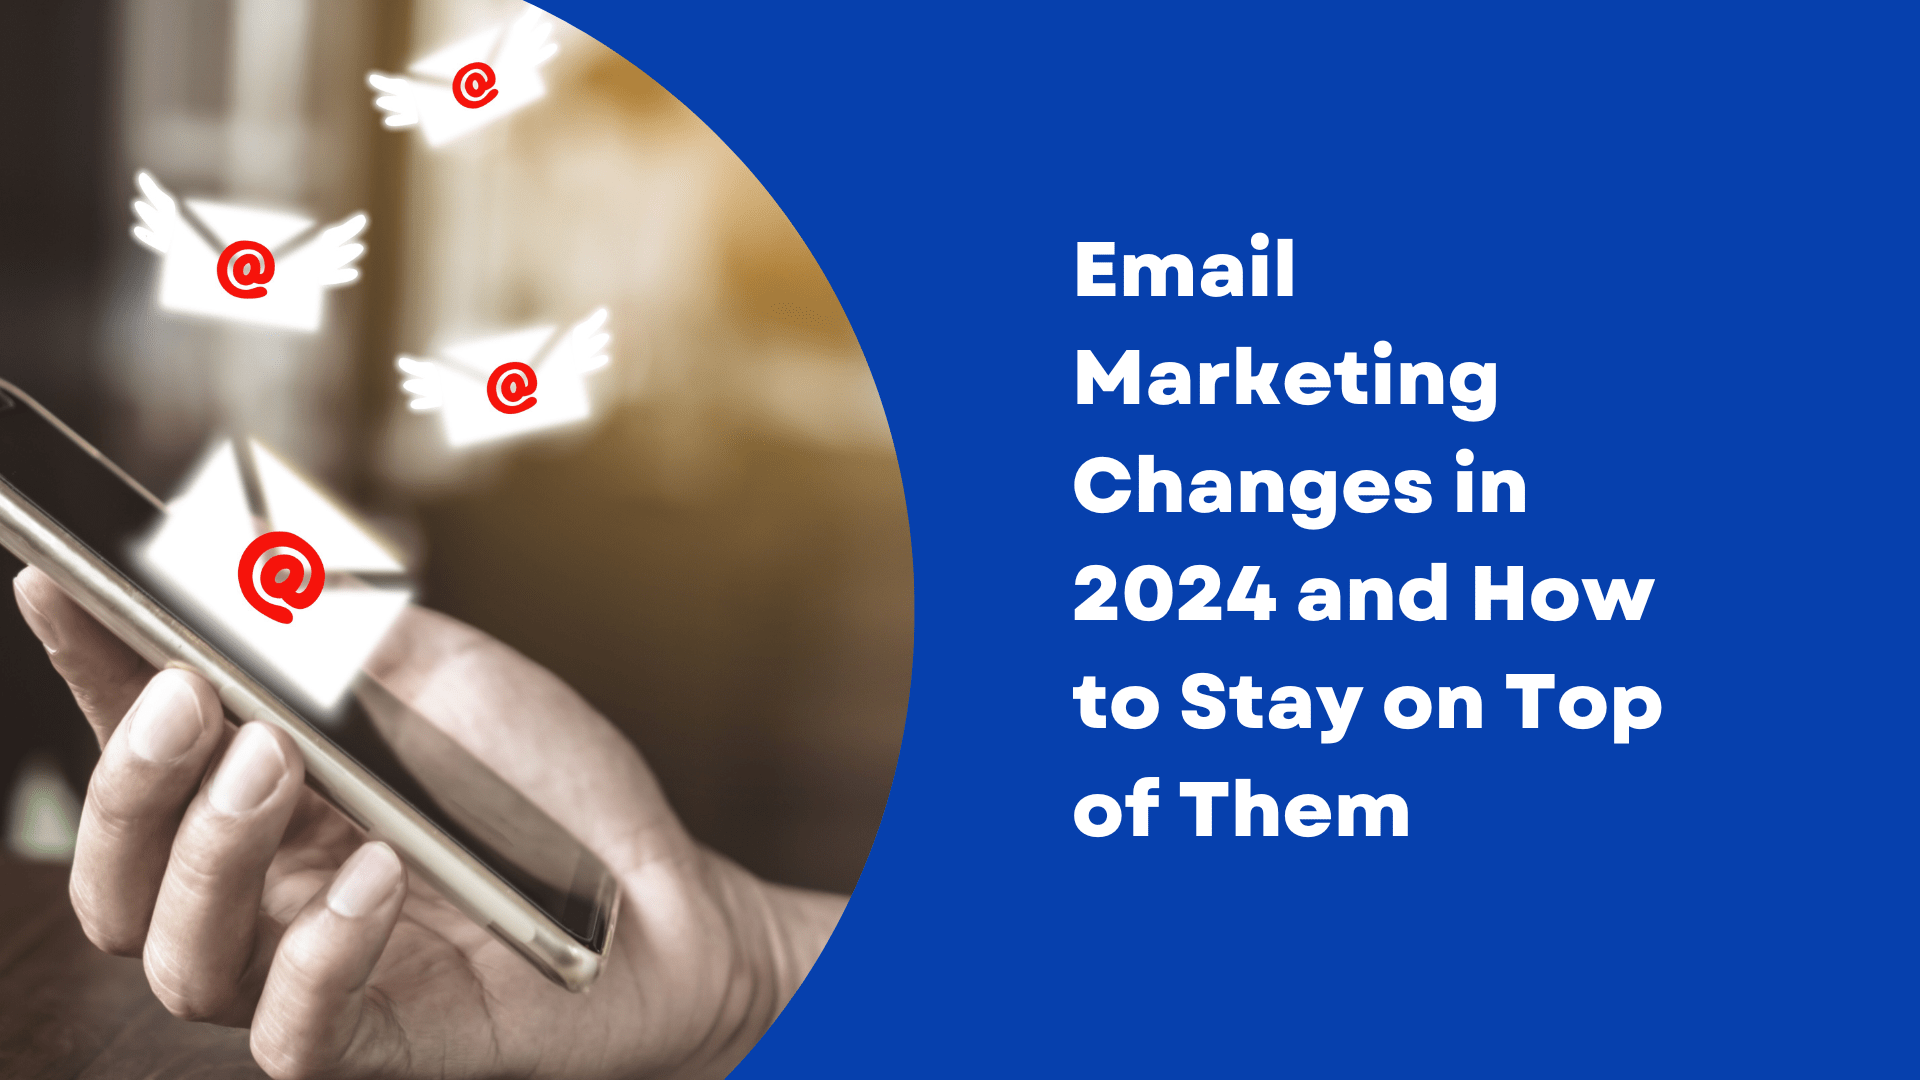 Email Marketing Changes in 2024 and How to Stay On Top of Them